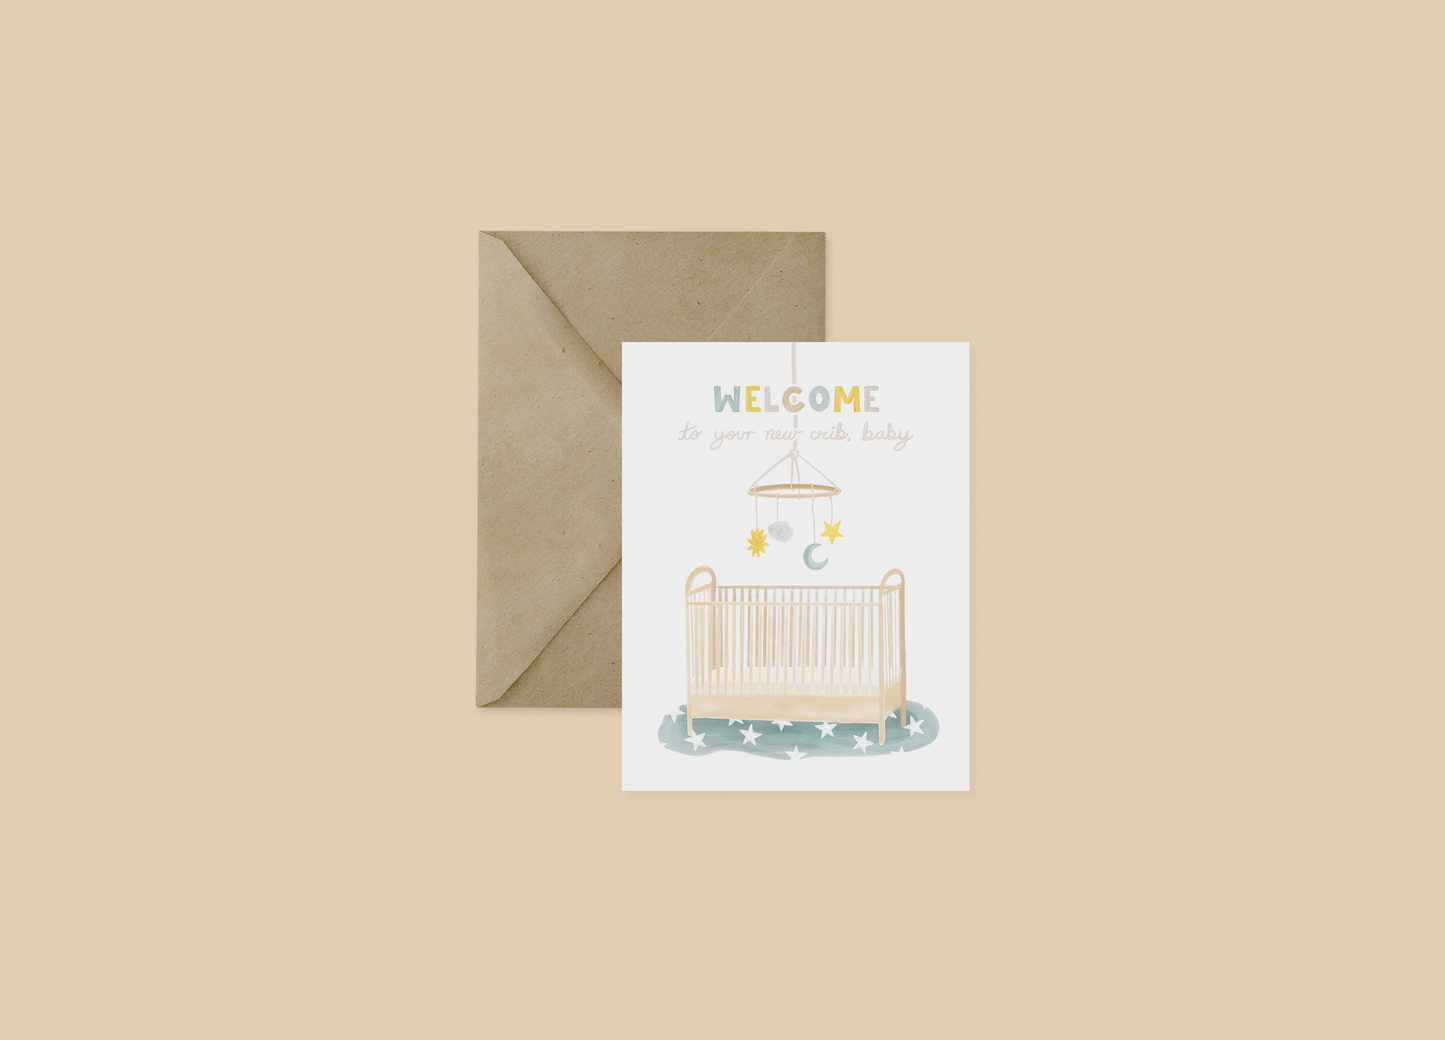 welcome to your new crib, baby, baby shower greeting card gift, new mom, expecting mother, pregnancy announcement, cute funny, baby shower card for coworker friend cousin niece aunt sister 